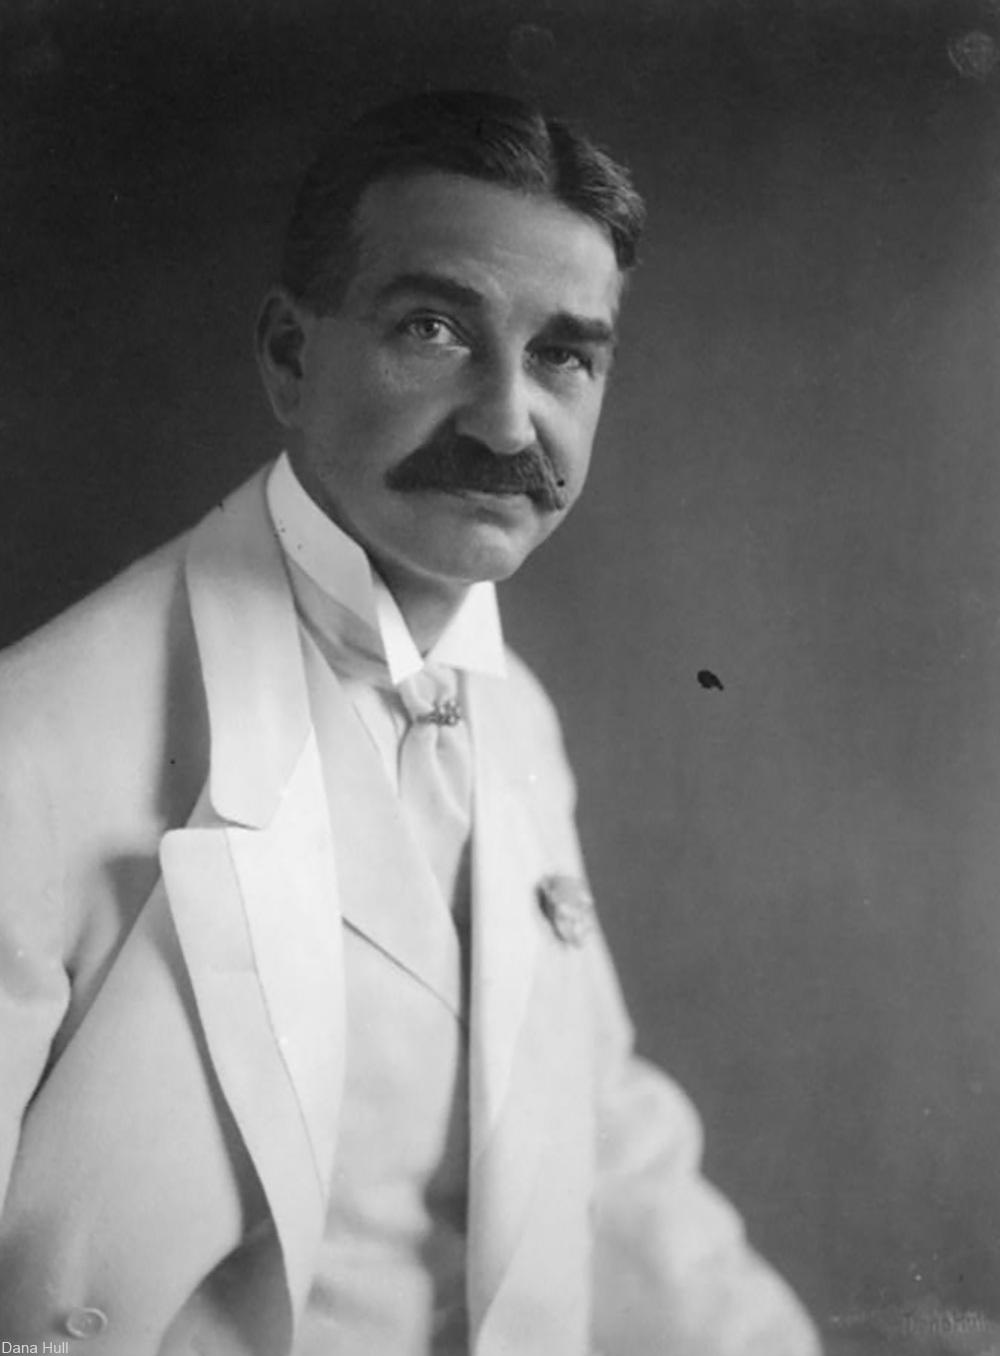 photo of L. Frank Baum from 1908